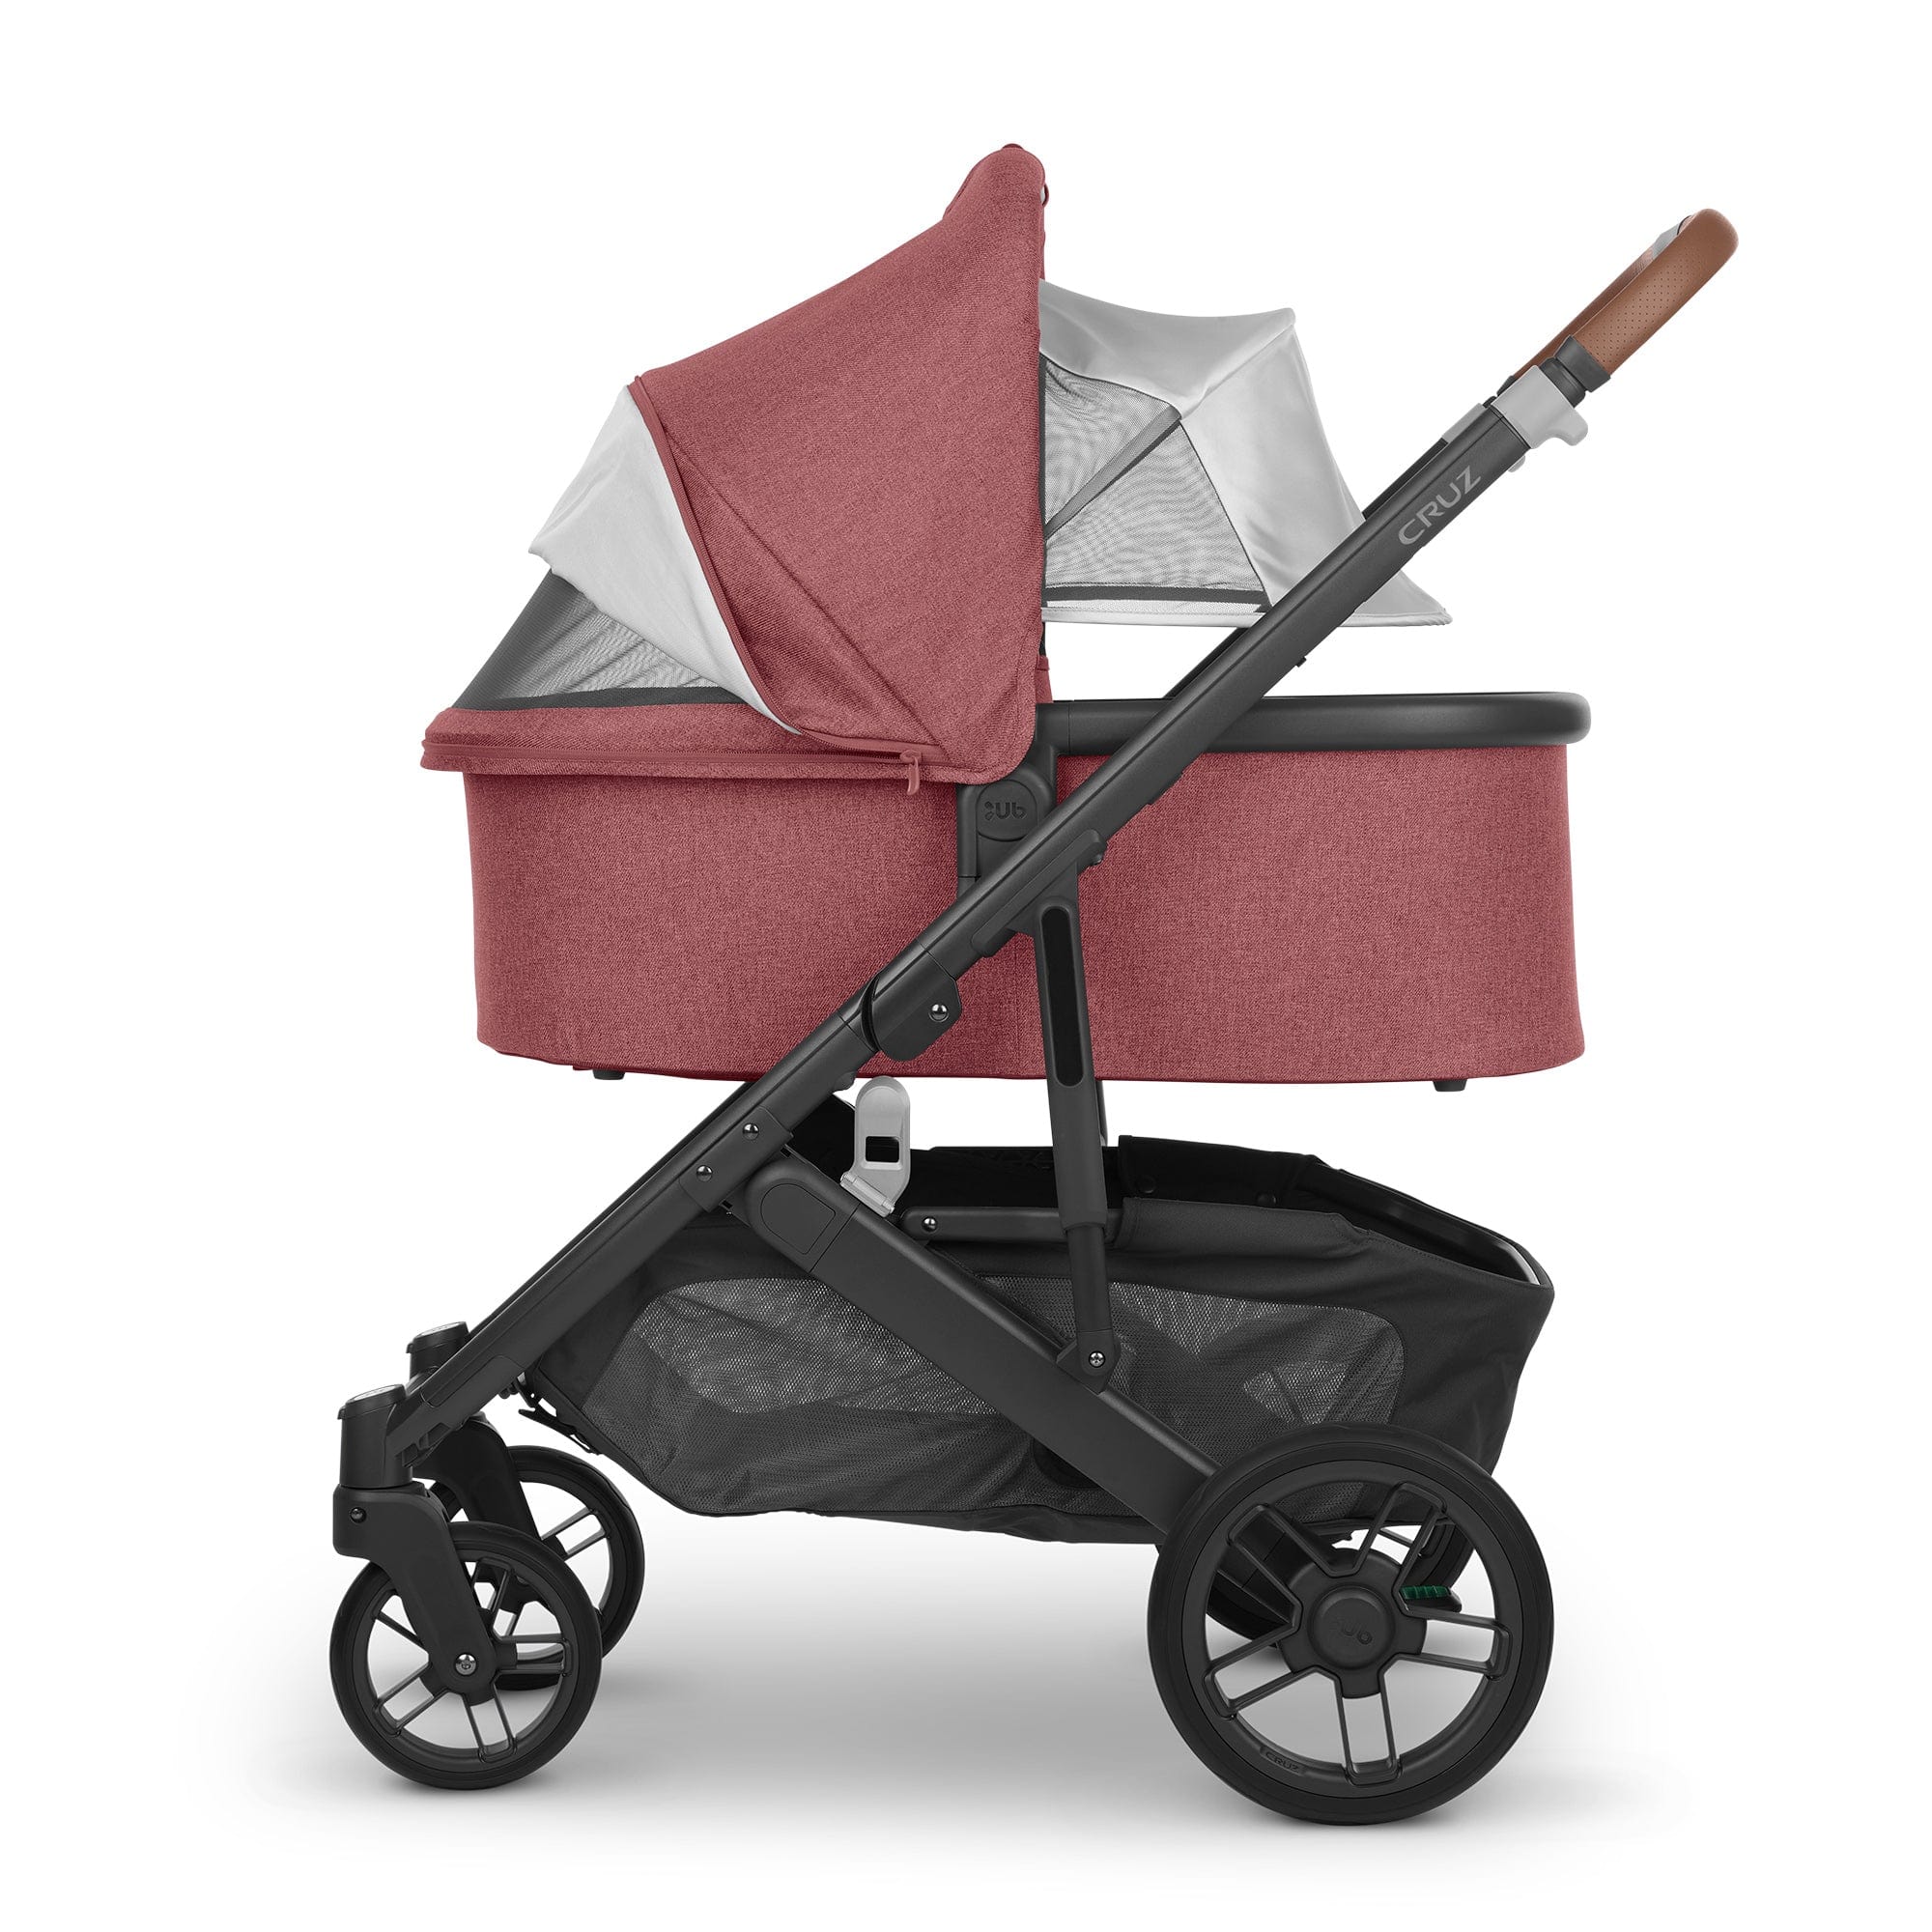 Uppababy travel systems UPPAbaby Cruz v2 Cloud T & Base Travel System - Lucy 13986-LUC